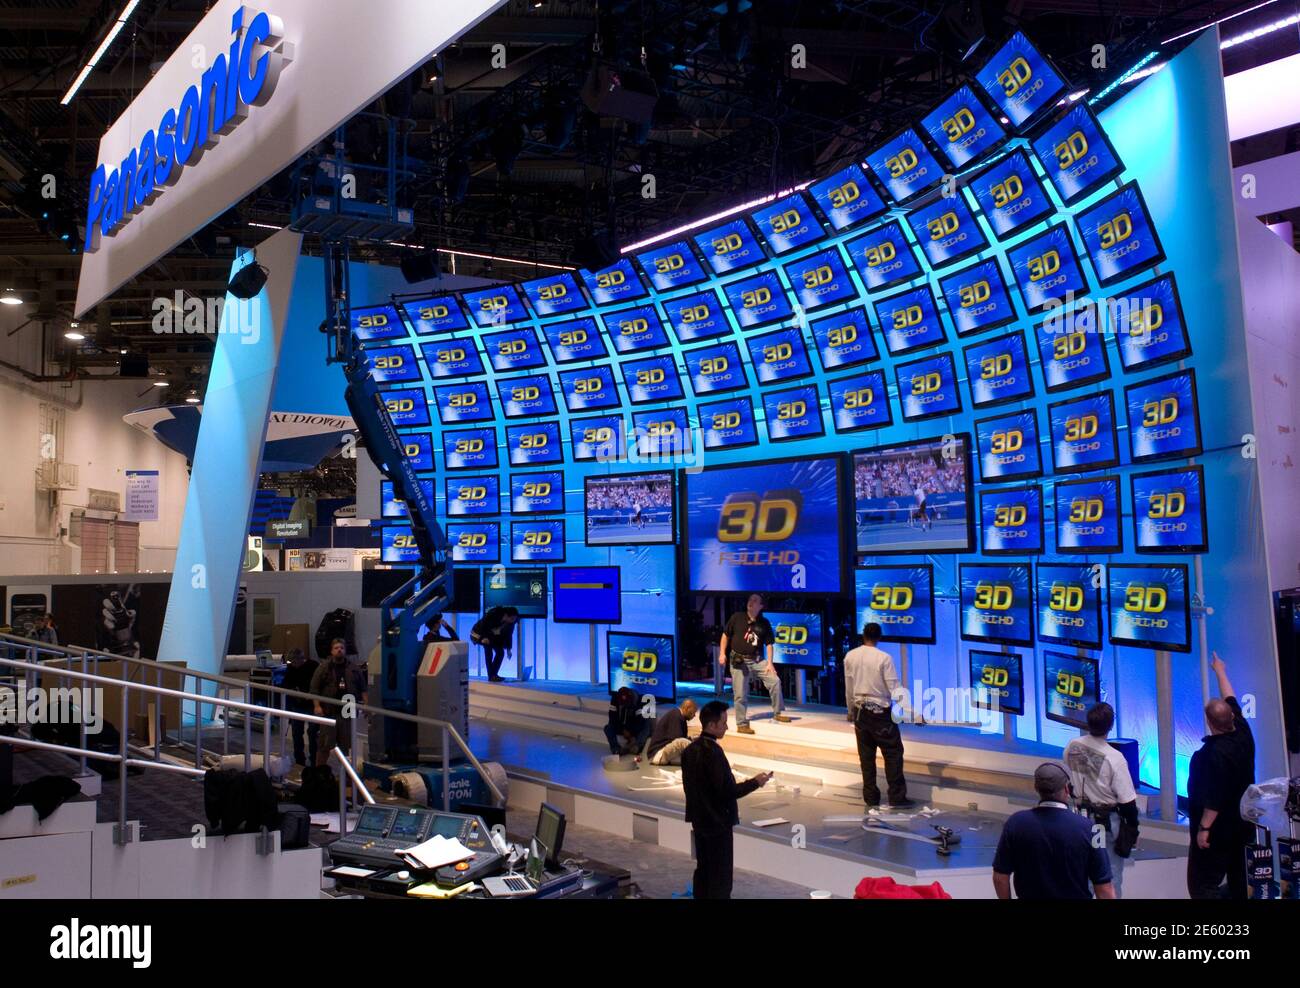 Workers in the Panasonic booth prepare for the 2011 International Consumer Electronics Show (CES) in Las Vegas, Nevada January 5, 2011. The annual Consumer Electronics Show in Las Vegas from Jan. 6-9, showcases the tablets, 3D- and Internet-enabled TVs expected to make the biggest splash in 2011. The battle for recession-weary consumers will pit Samsung Electronics, Sony Corp, LG Electronics, Google Inc, Netflix and Apple Inc against each other, all fighting to make their technology the standard.   REUTERS/Steve Marcus (UNITED STATES - Tags: BUSINESS) Stock Photo